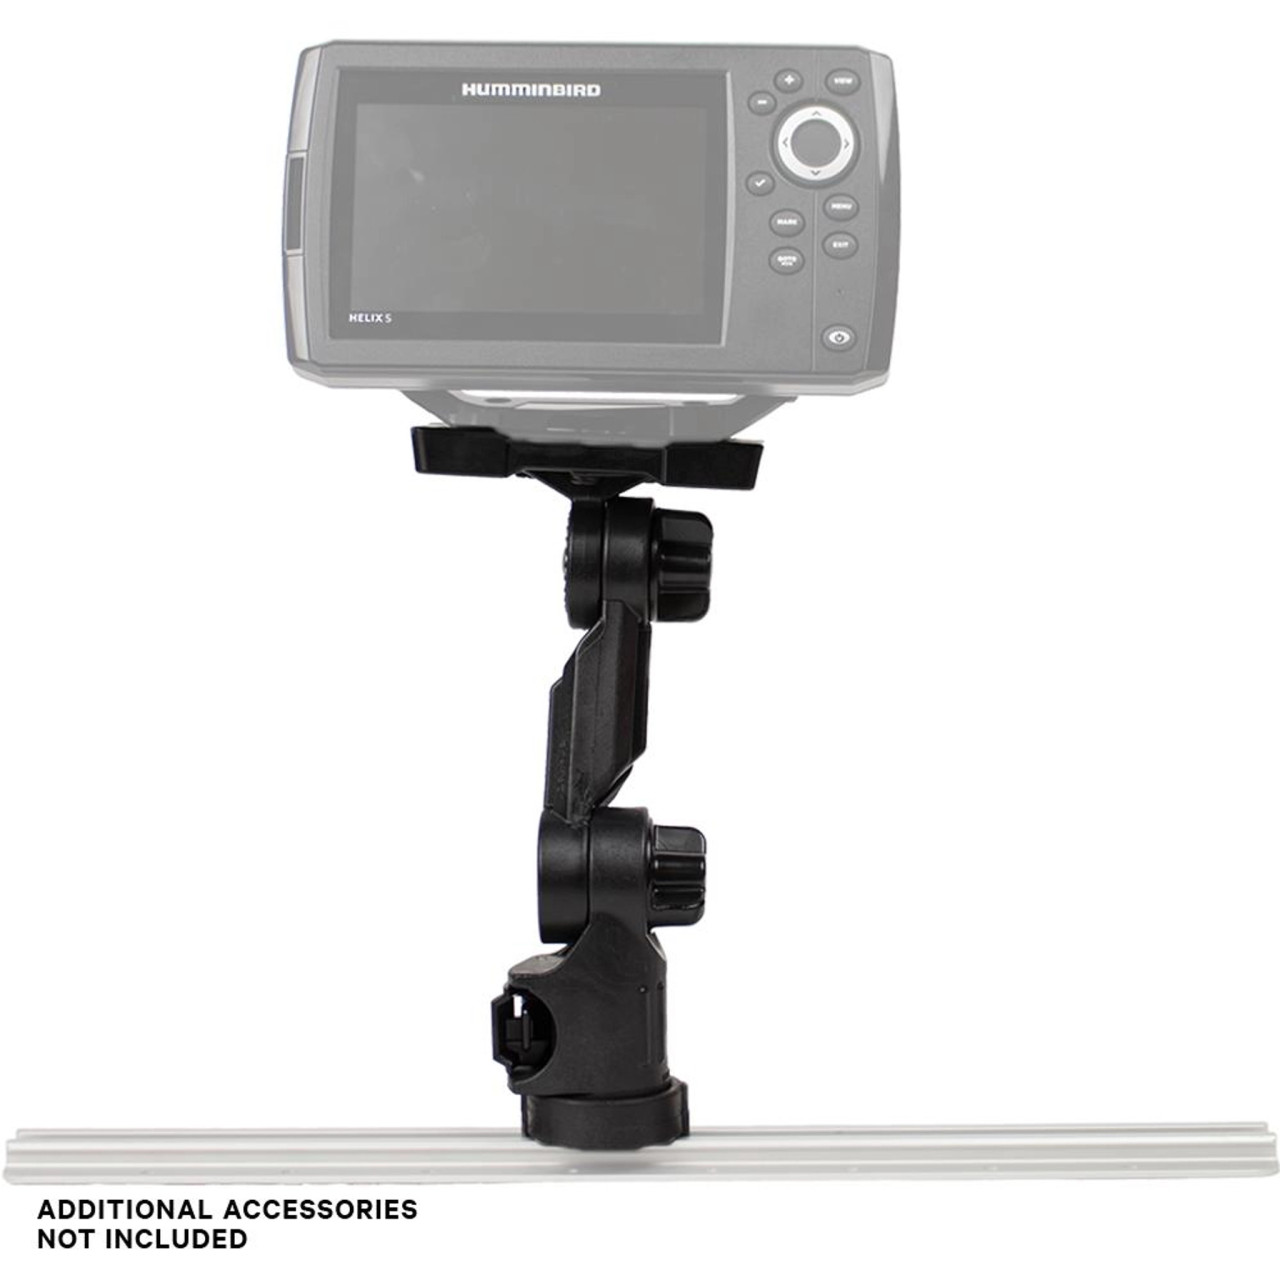 https://cdn11.bigcommerce.com/s-f3xbgyp2hq/images/stencil/1280x1280/products/2728/22733/humminbird-helix-fish-finder-mount-with-track-mounted-locknload-mounting-system-ffp-1004__09267__12279.1663778217.jpg?c=2